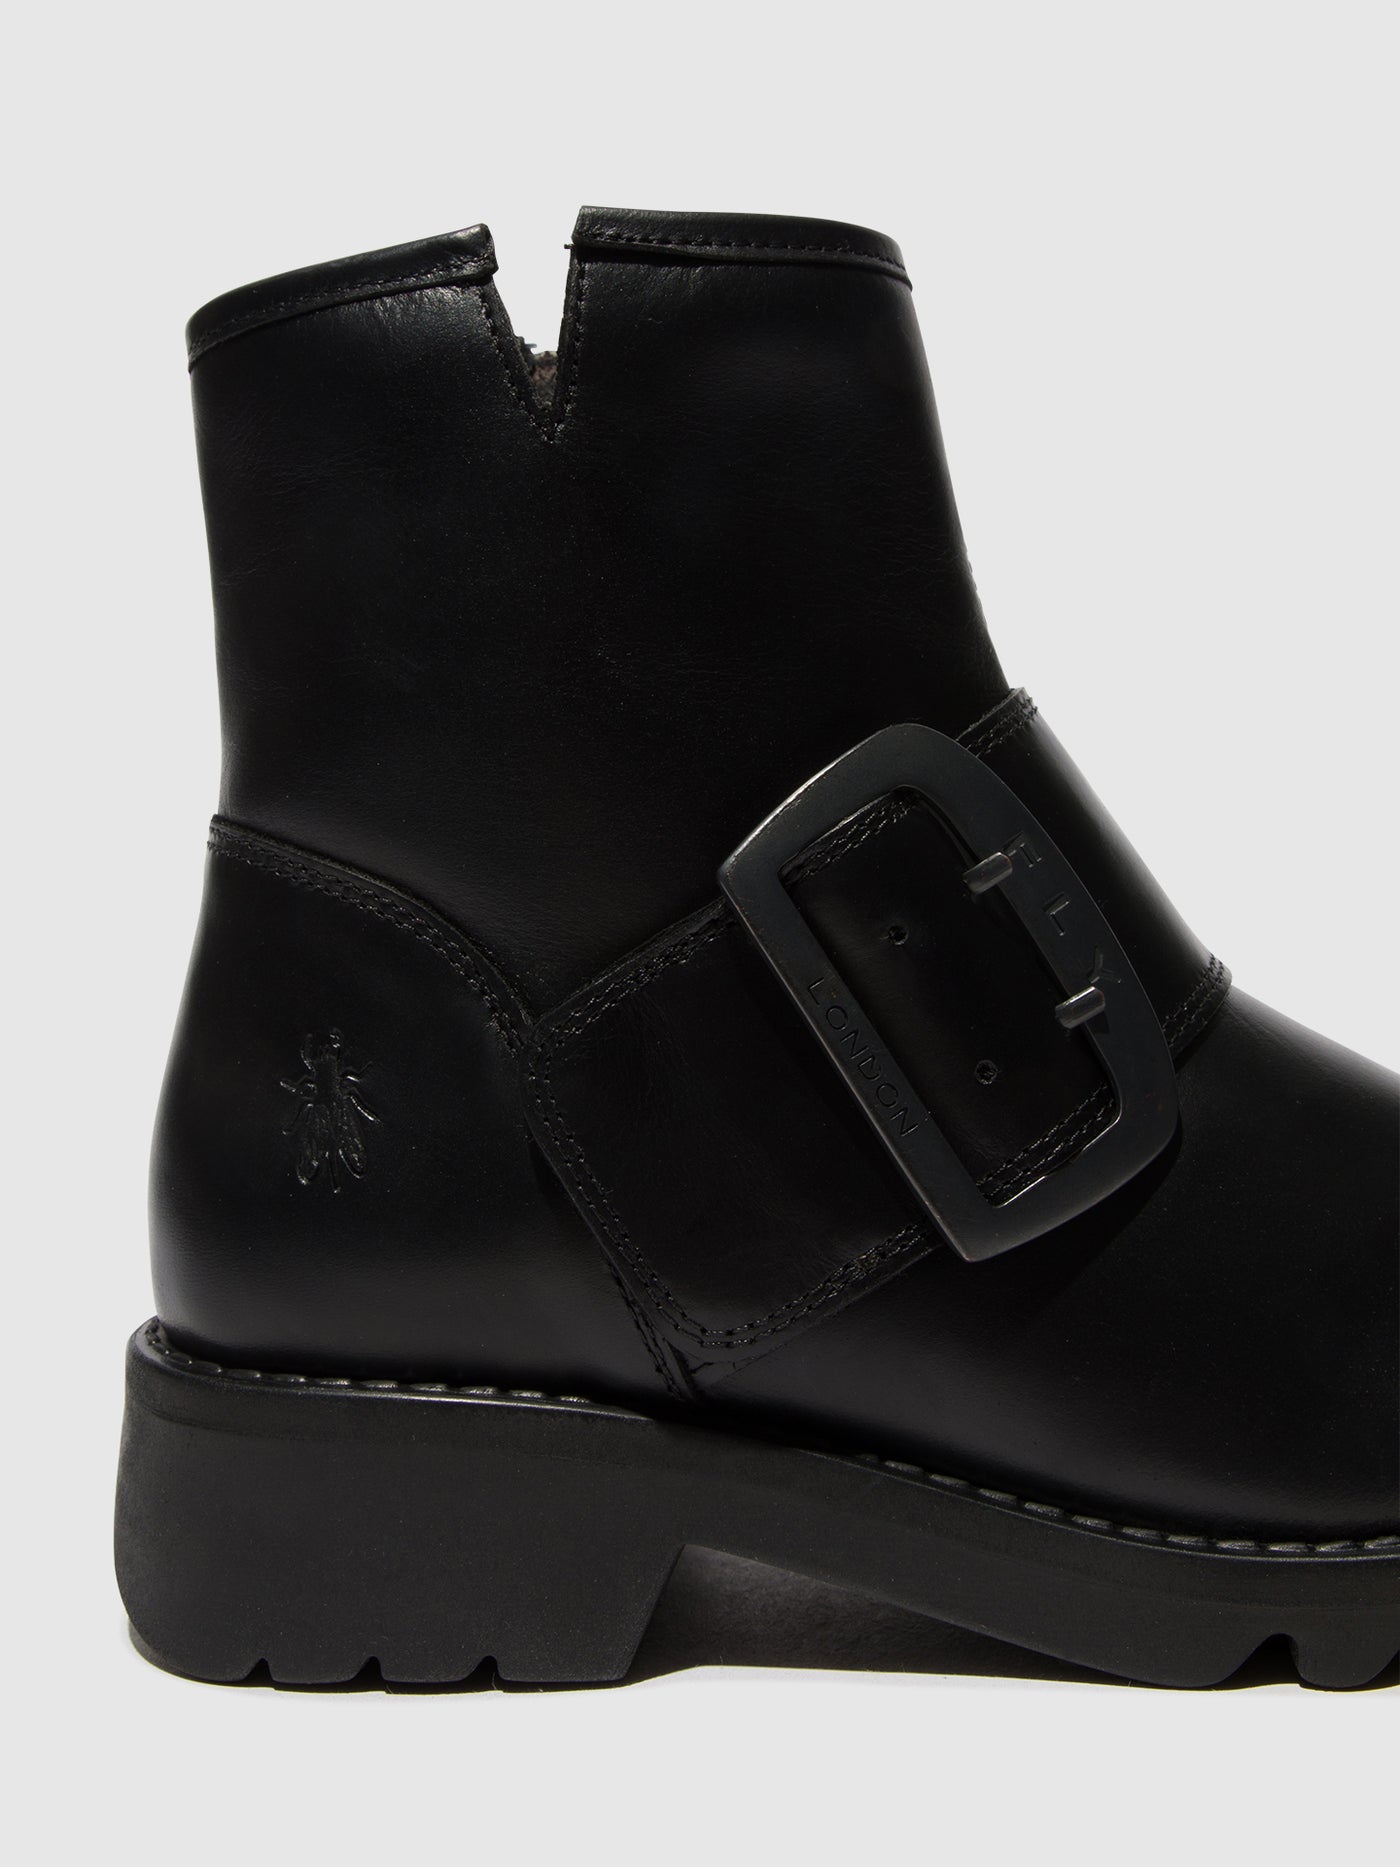 Buckle Ankle Boots RILY991FLY BLACK